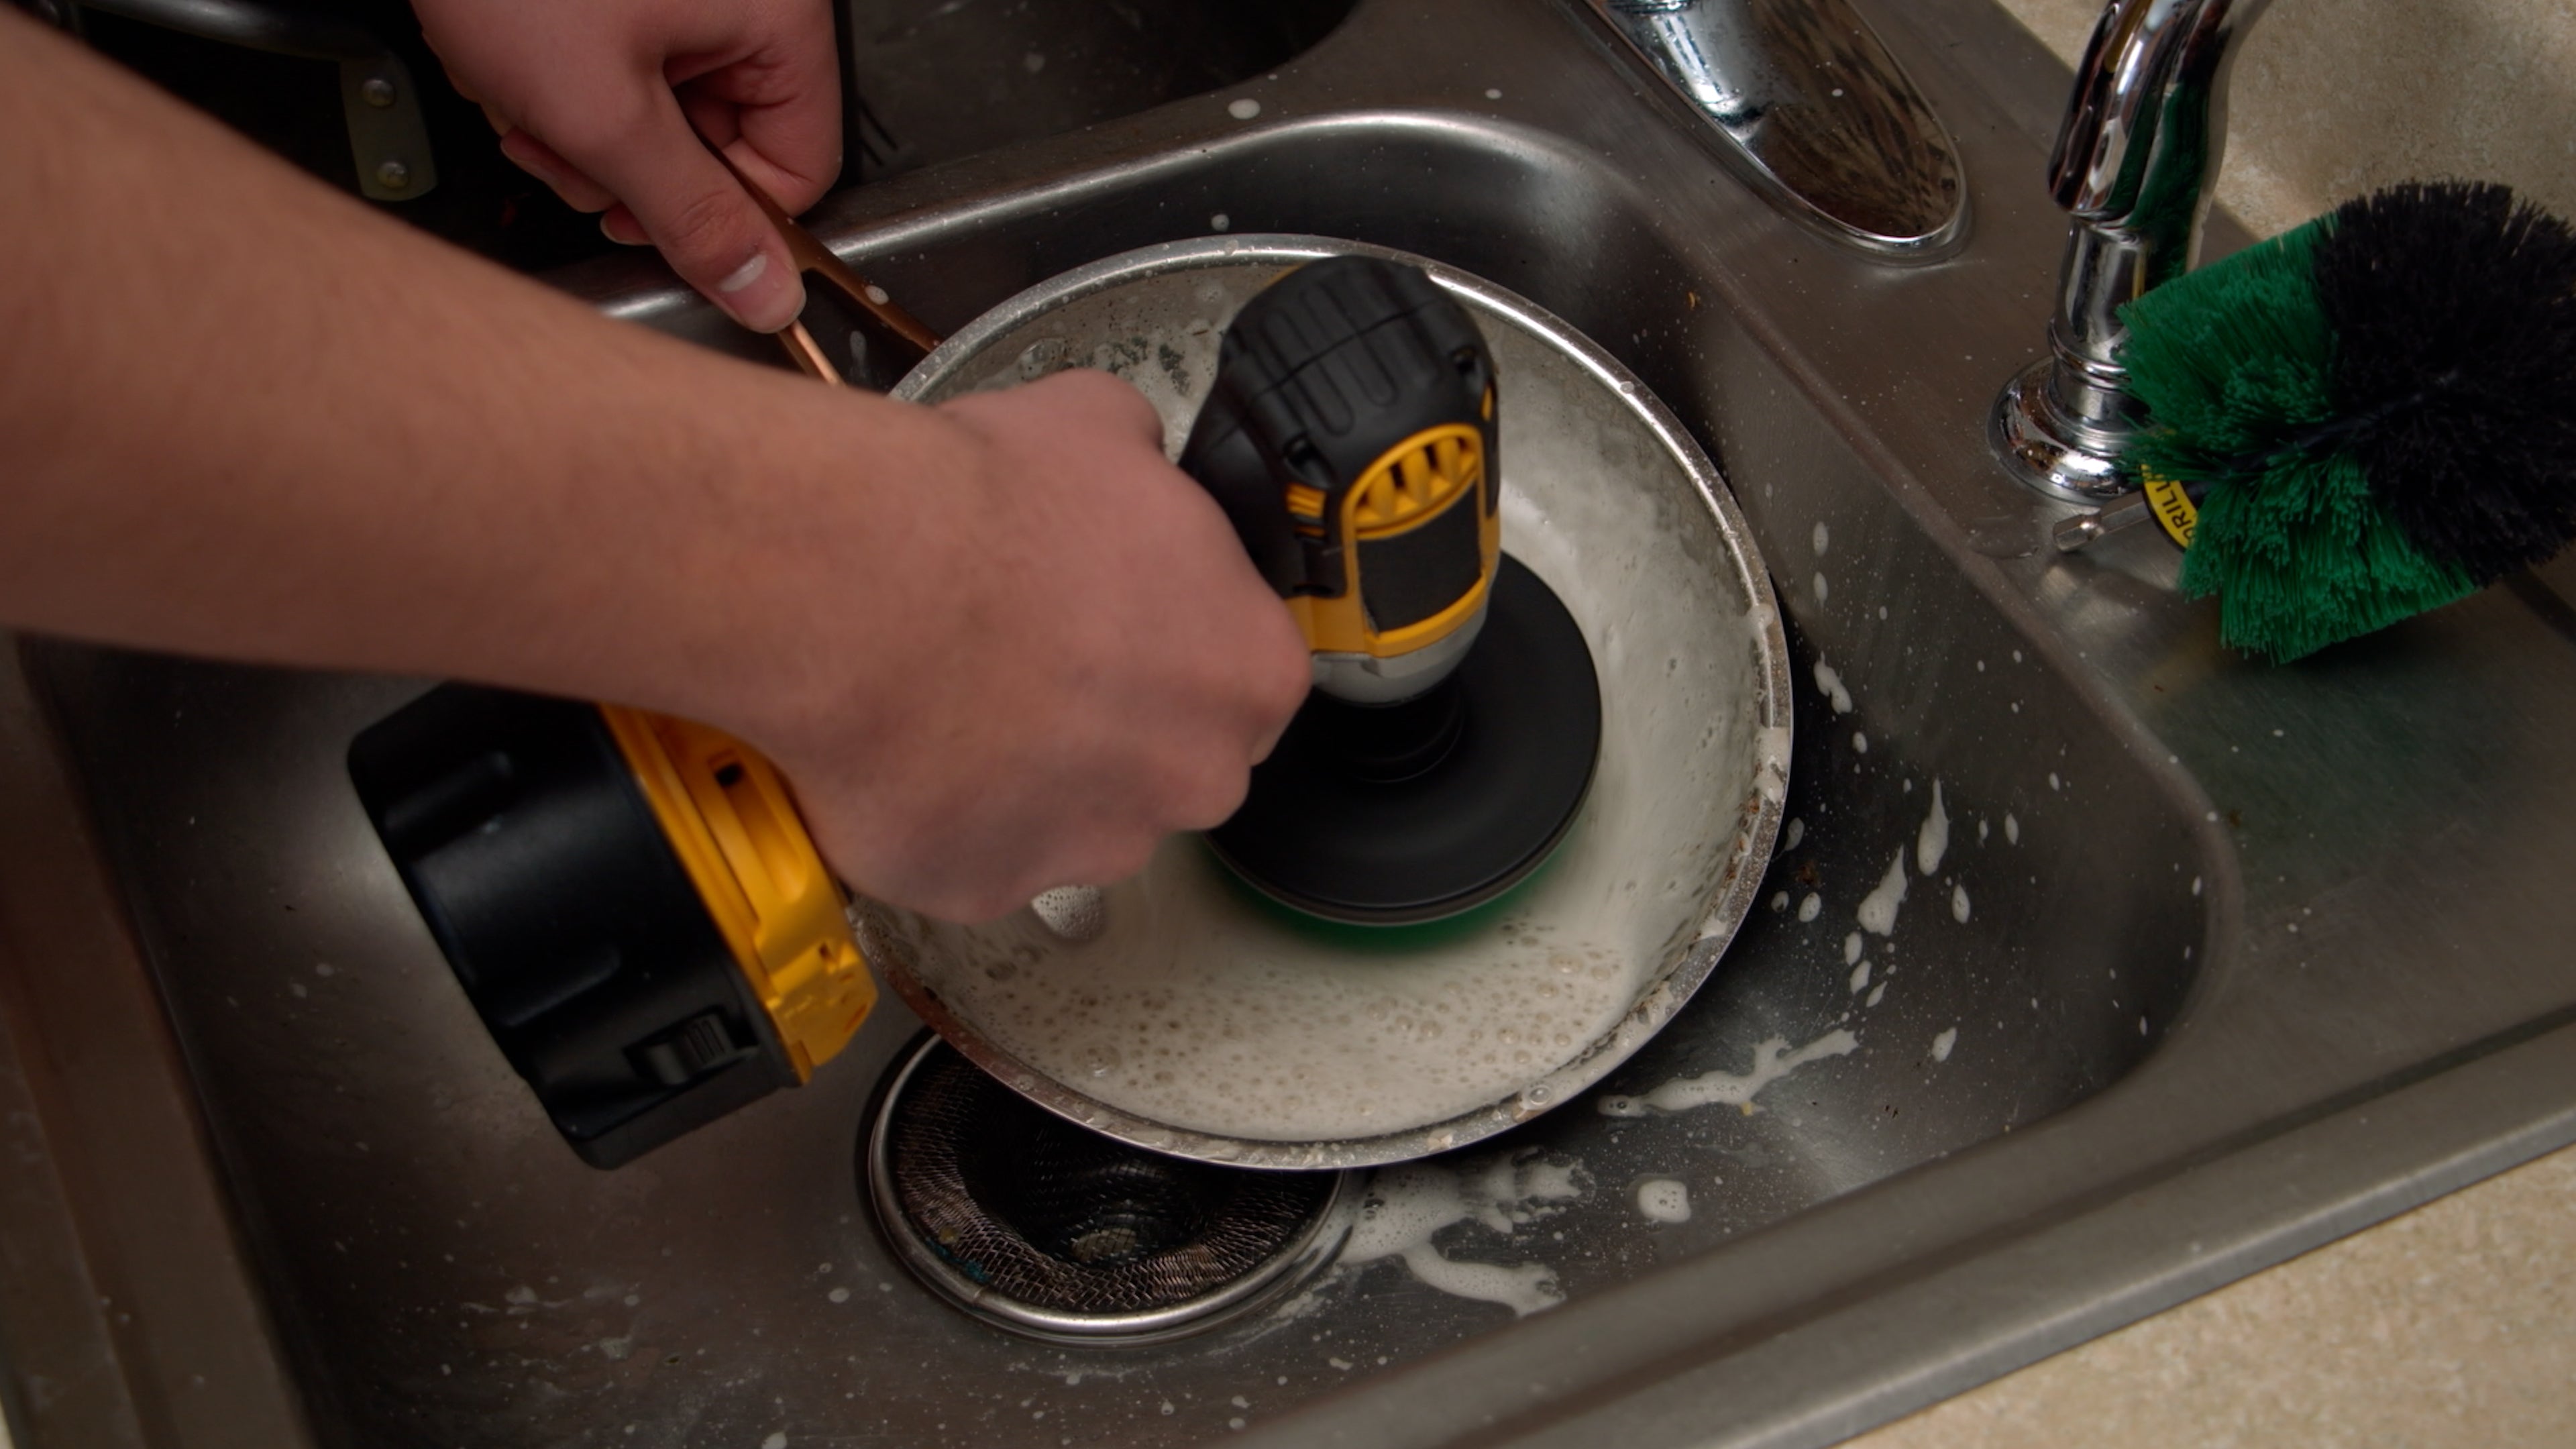 How to Get a Cleaner Kitchen in Half the Time Using a Drillbrush Power